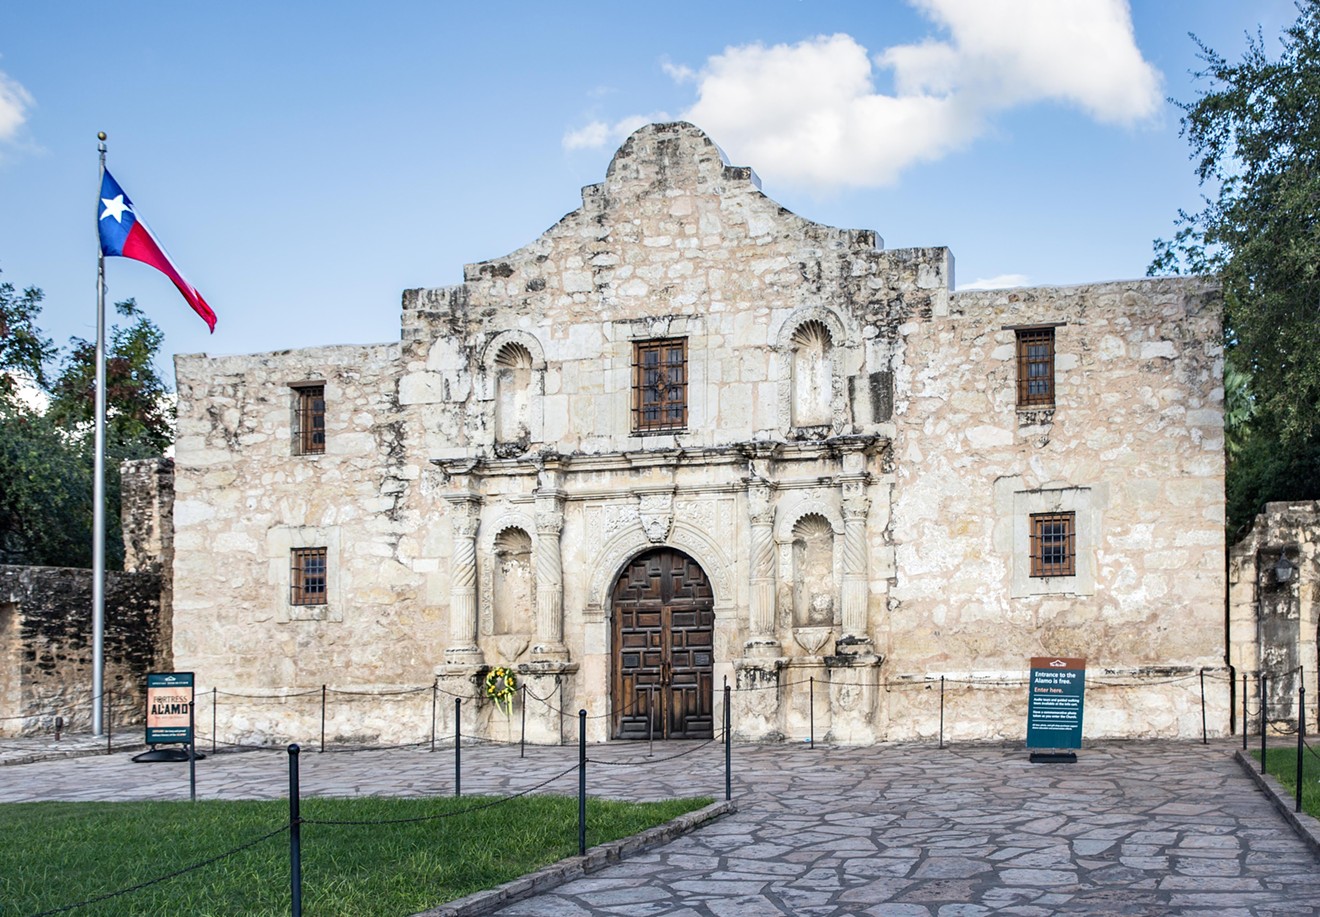 The authors of "Forget the Alamo" are facing considerable blowback from Texas Republicans.